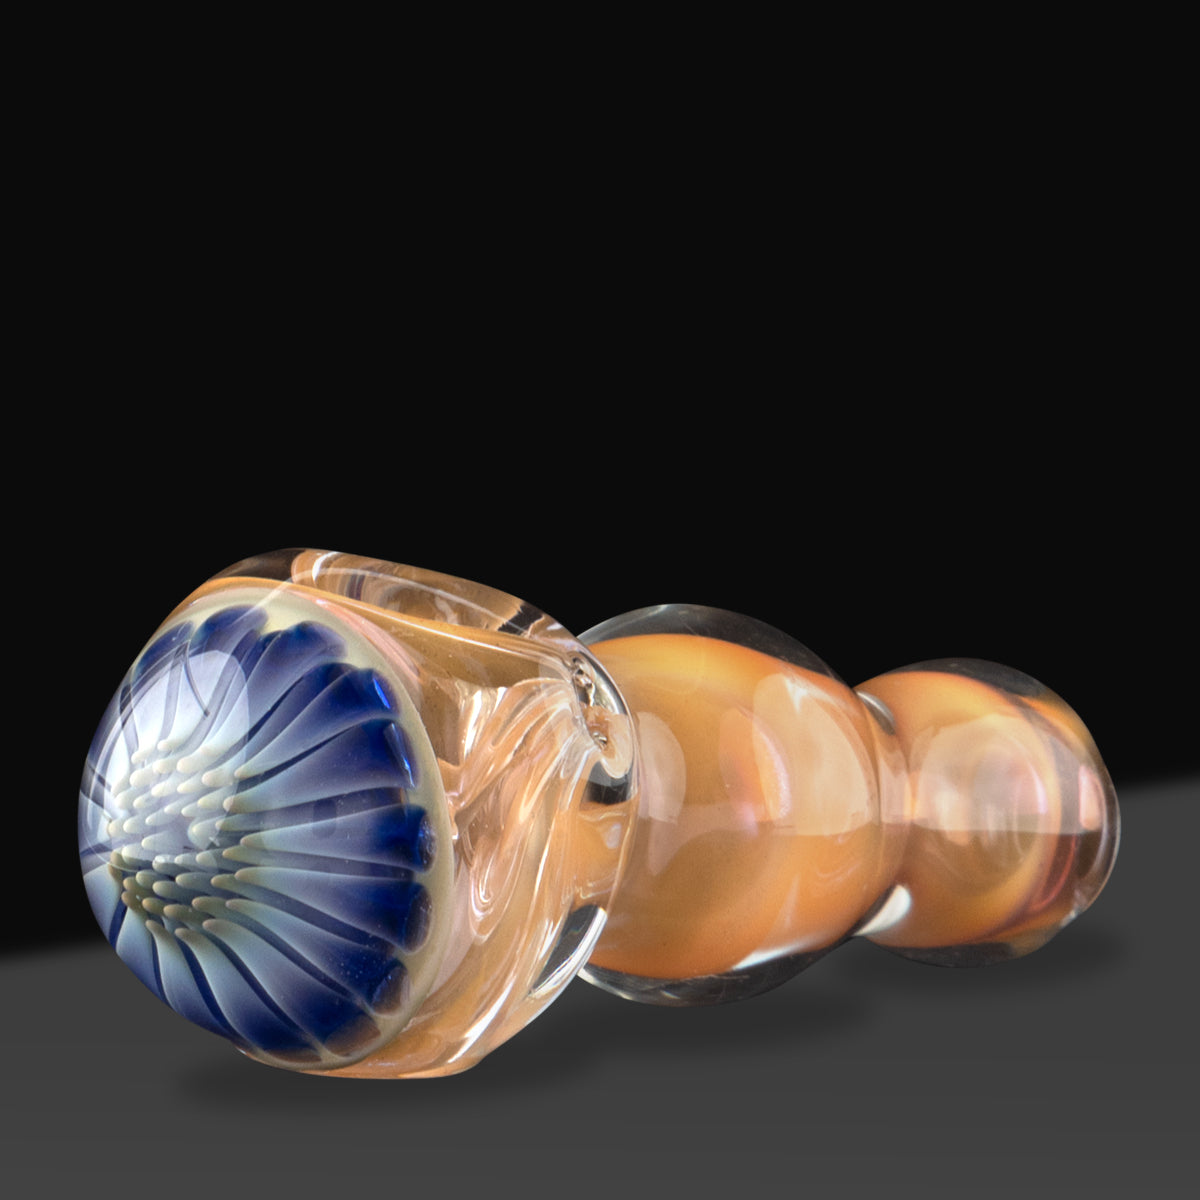 Hand Pipe | Brick Glass Fumed Comb Design Hand Pipe | 3.5" - Glass - 3 Count